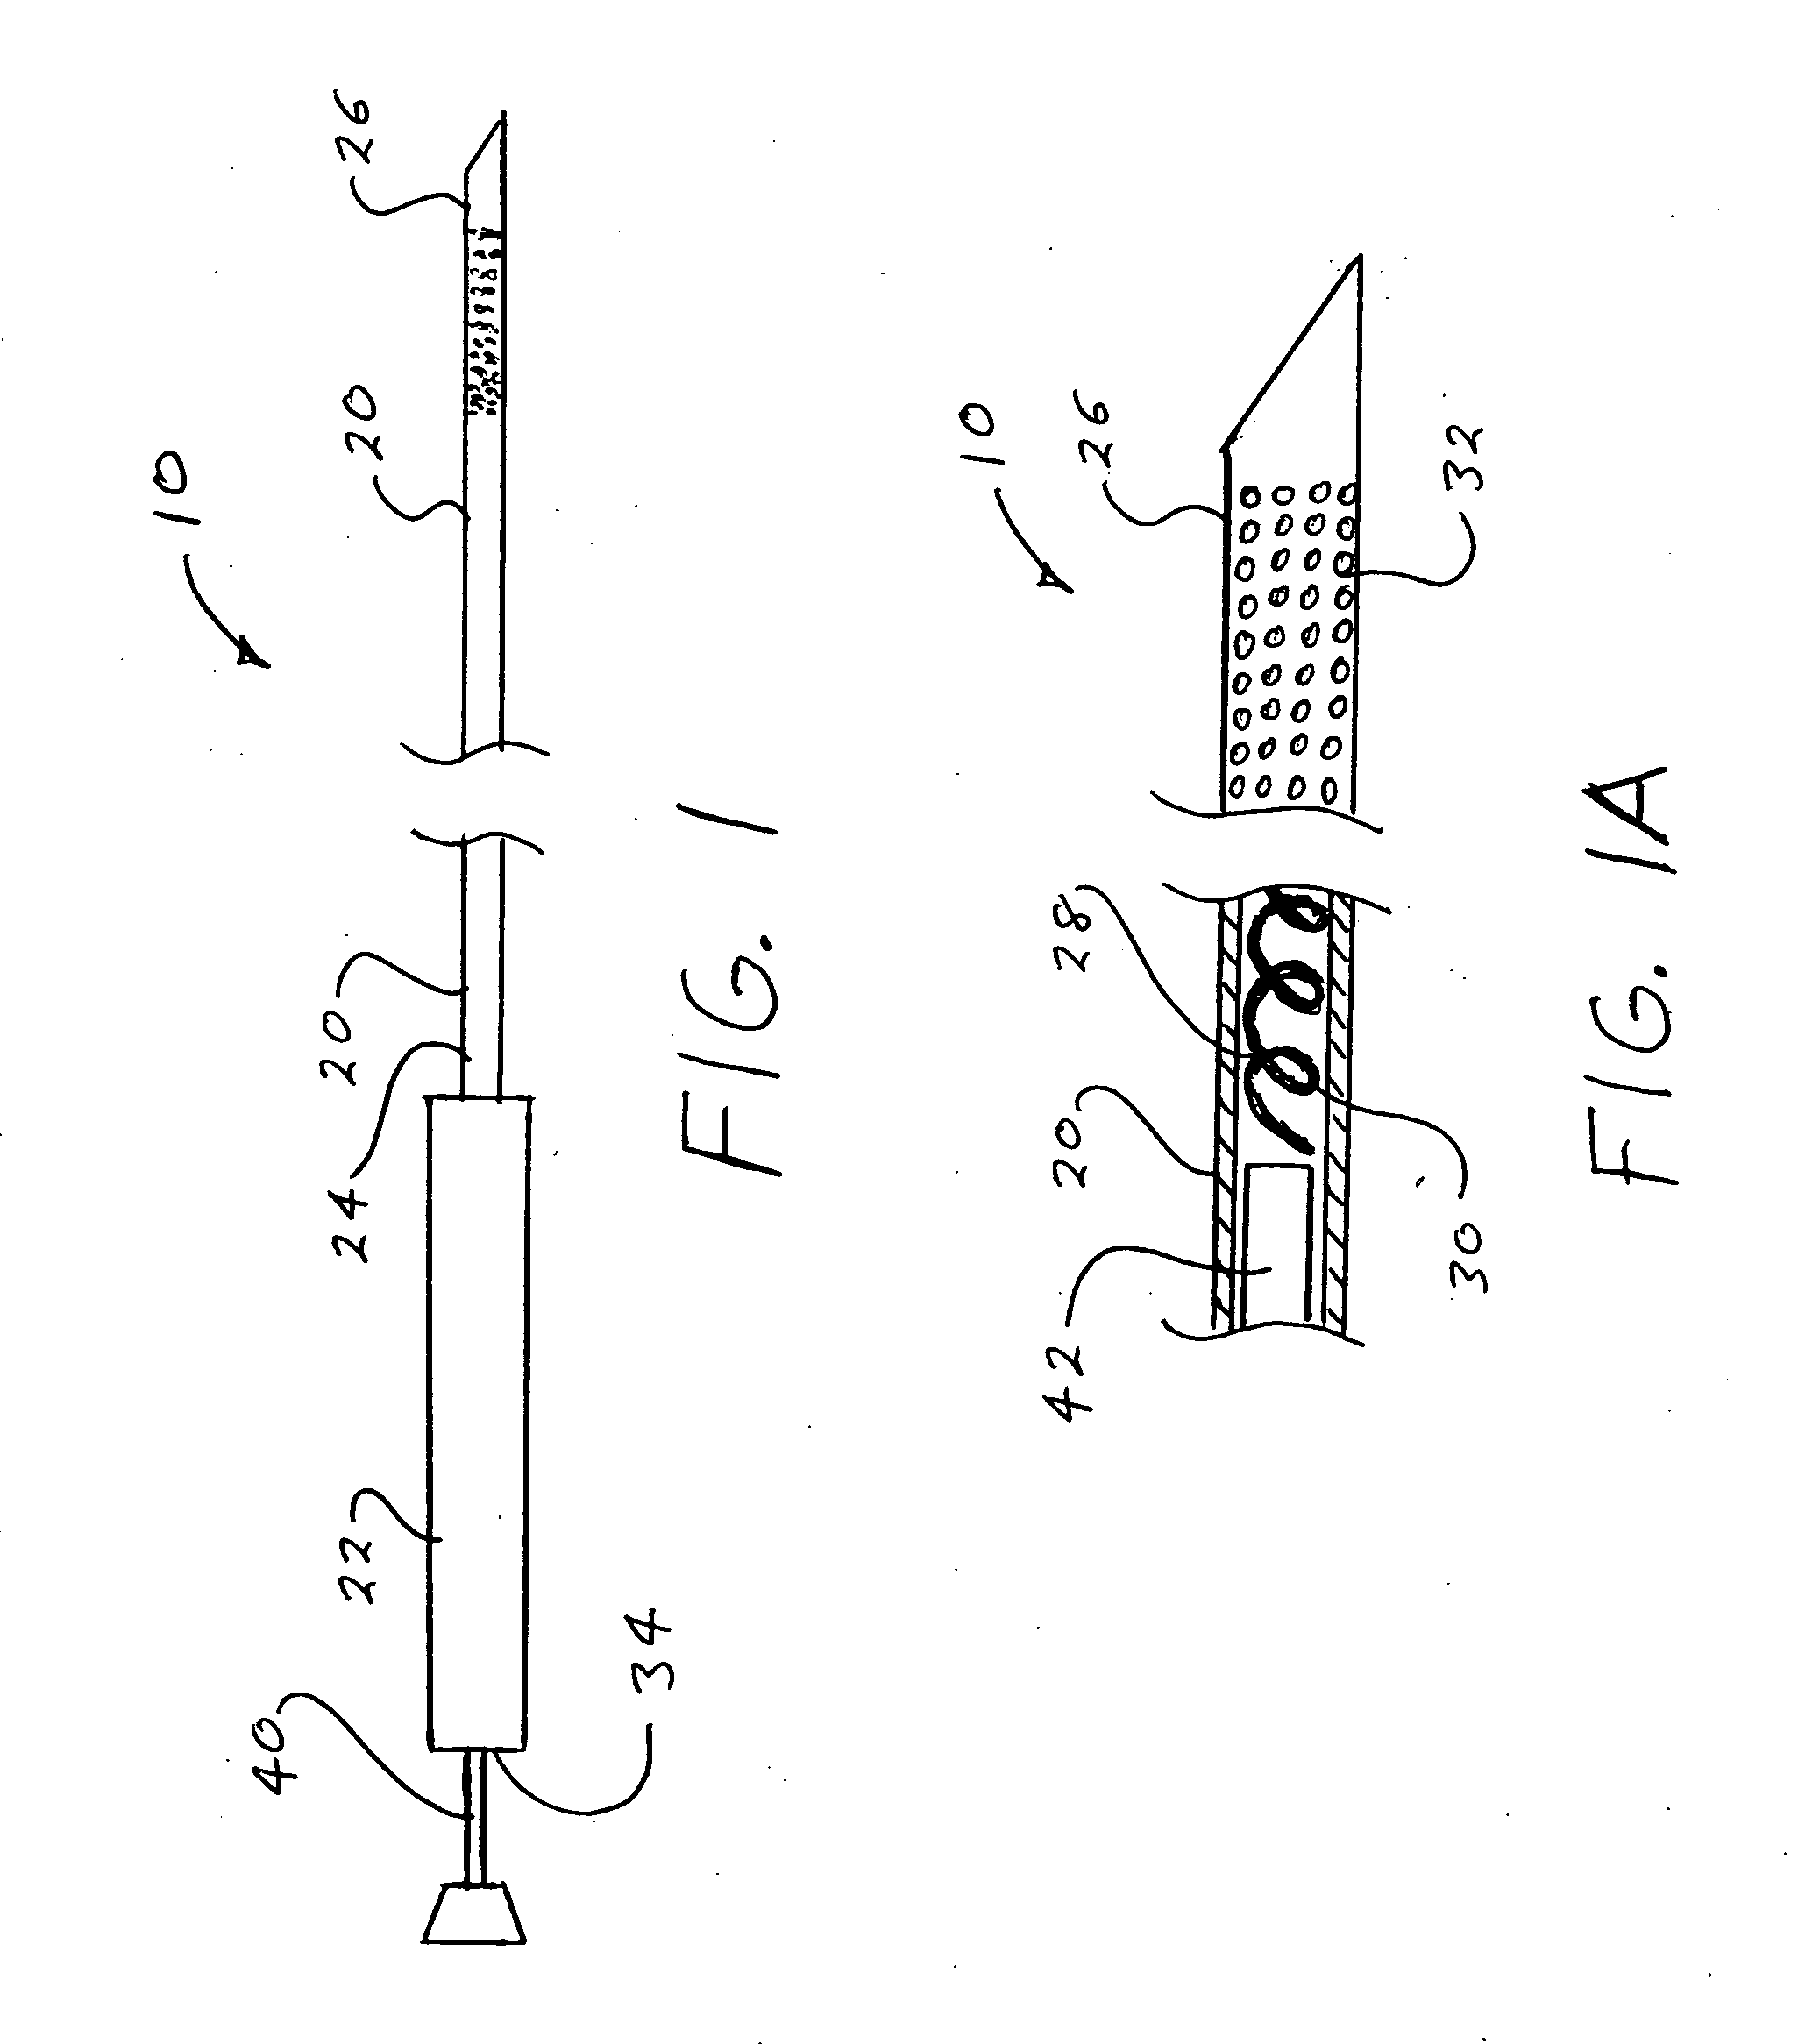 Embolization coil delivery systems and methods